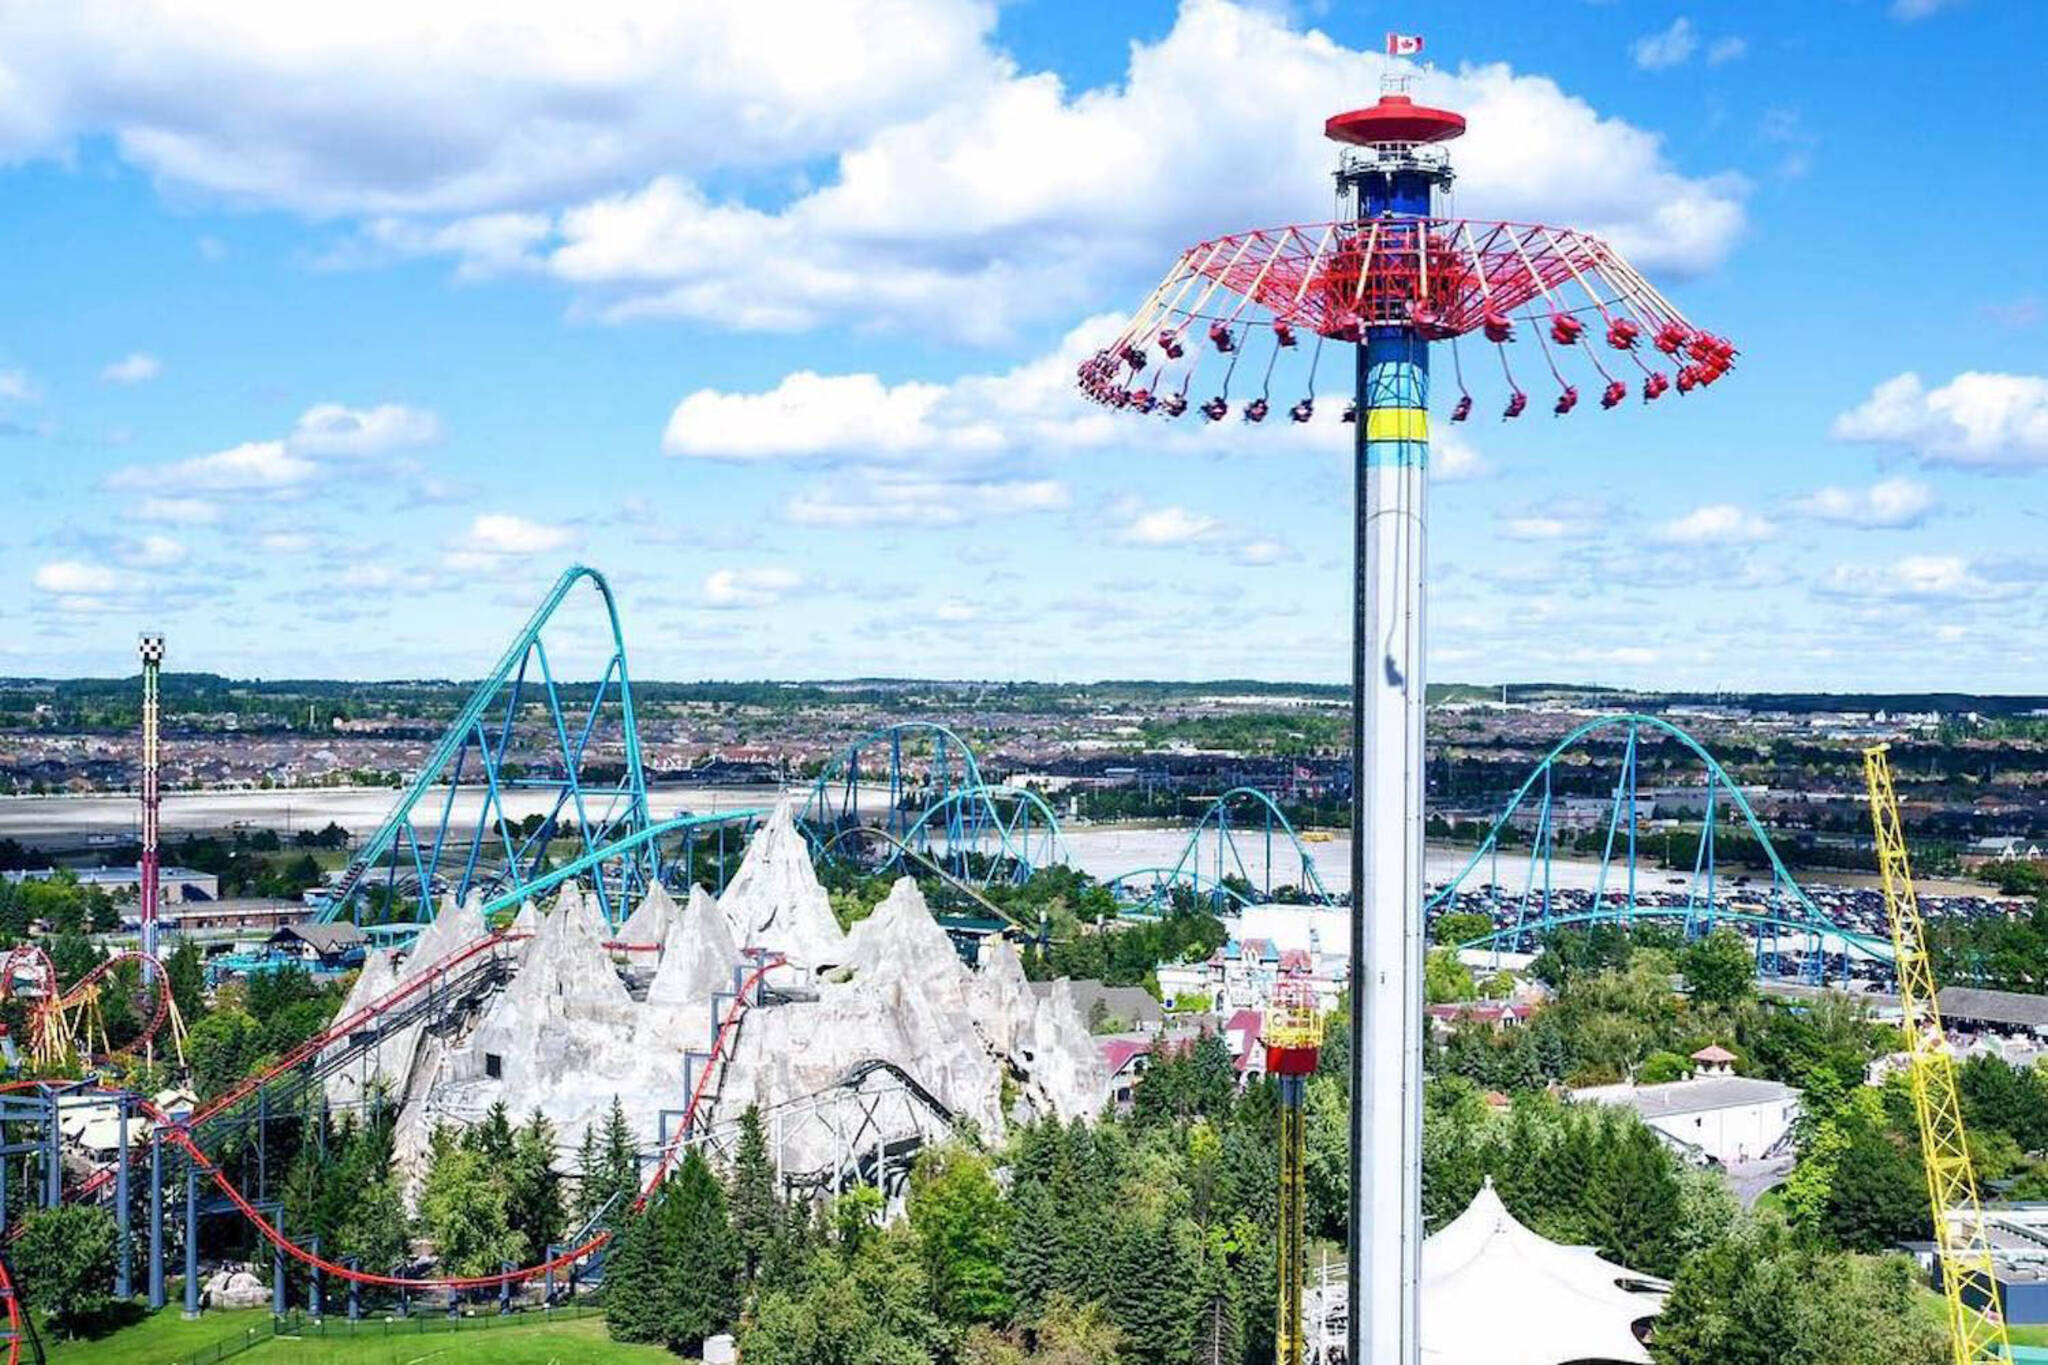 Canada S Wonderland And Other Amusement Parks Start To Get Ready For Opening Day